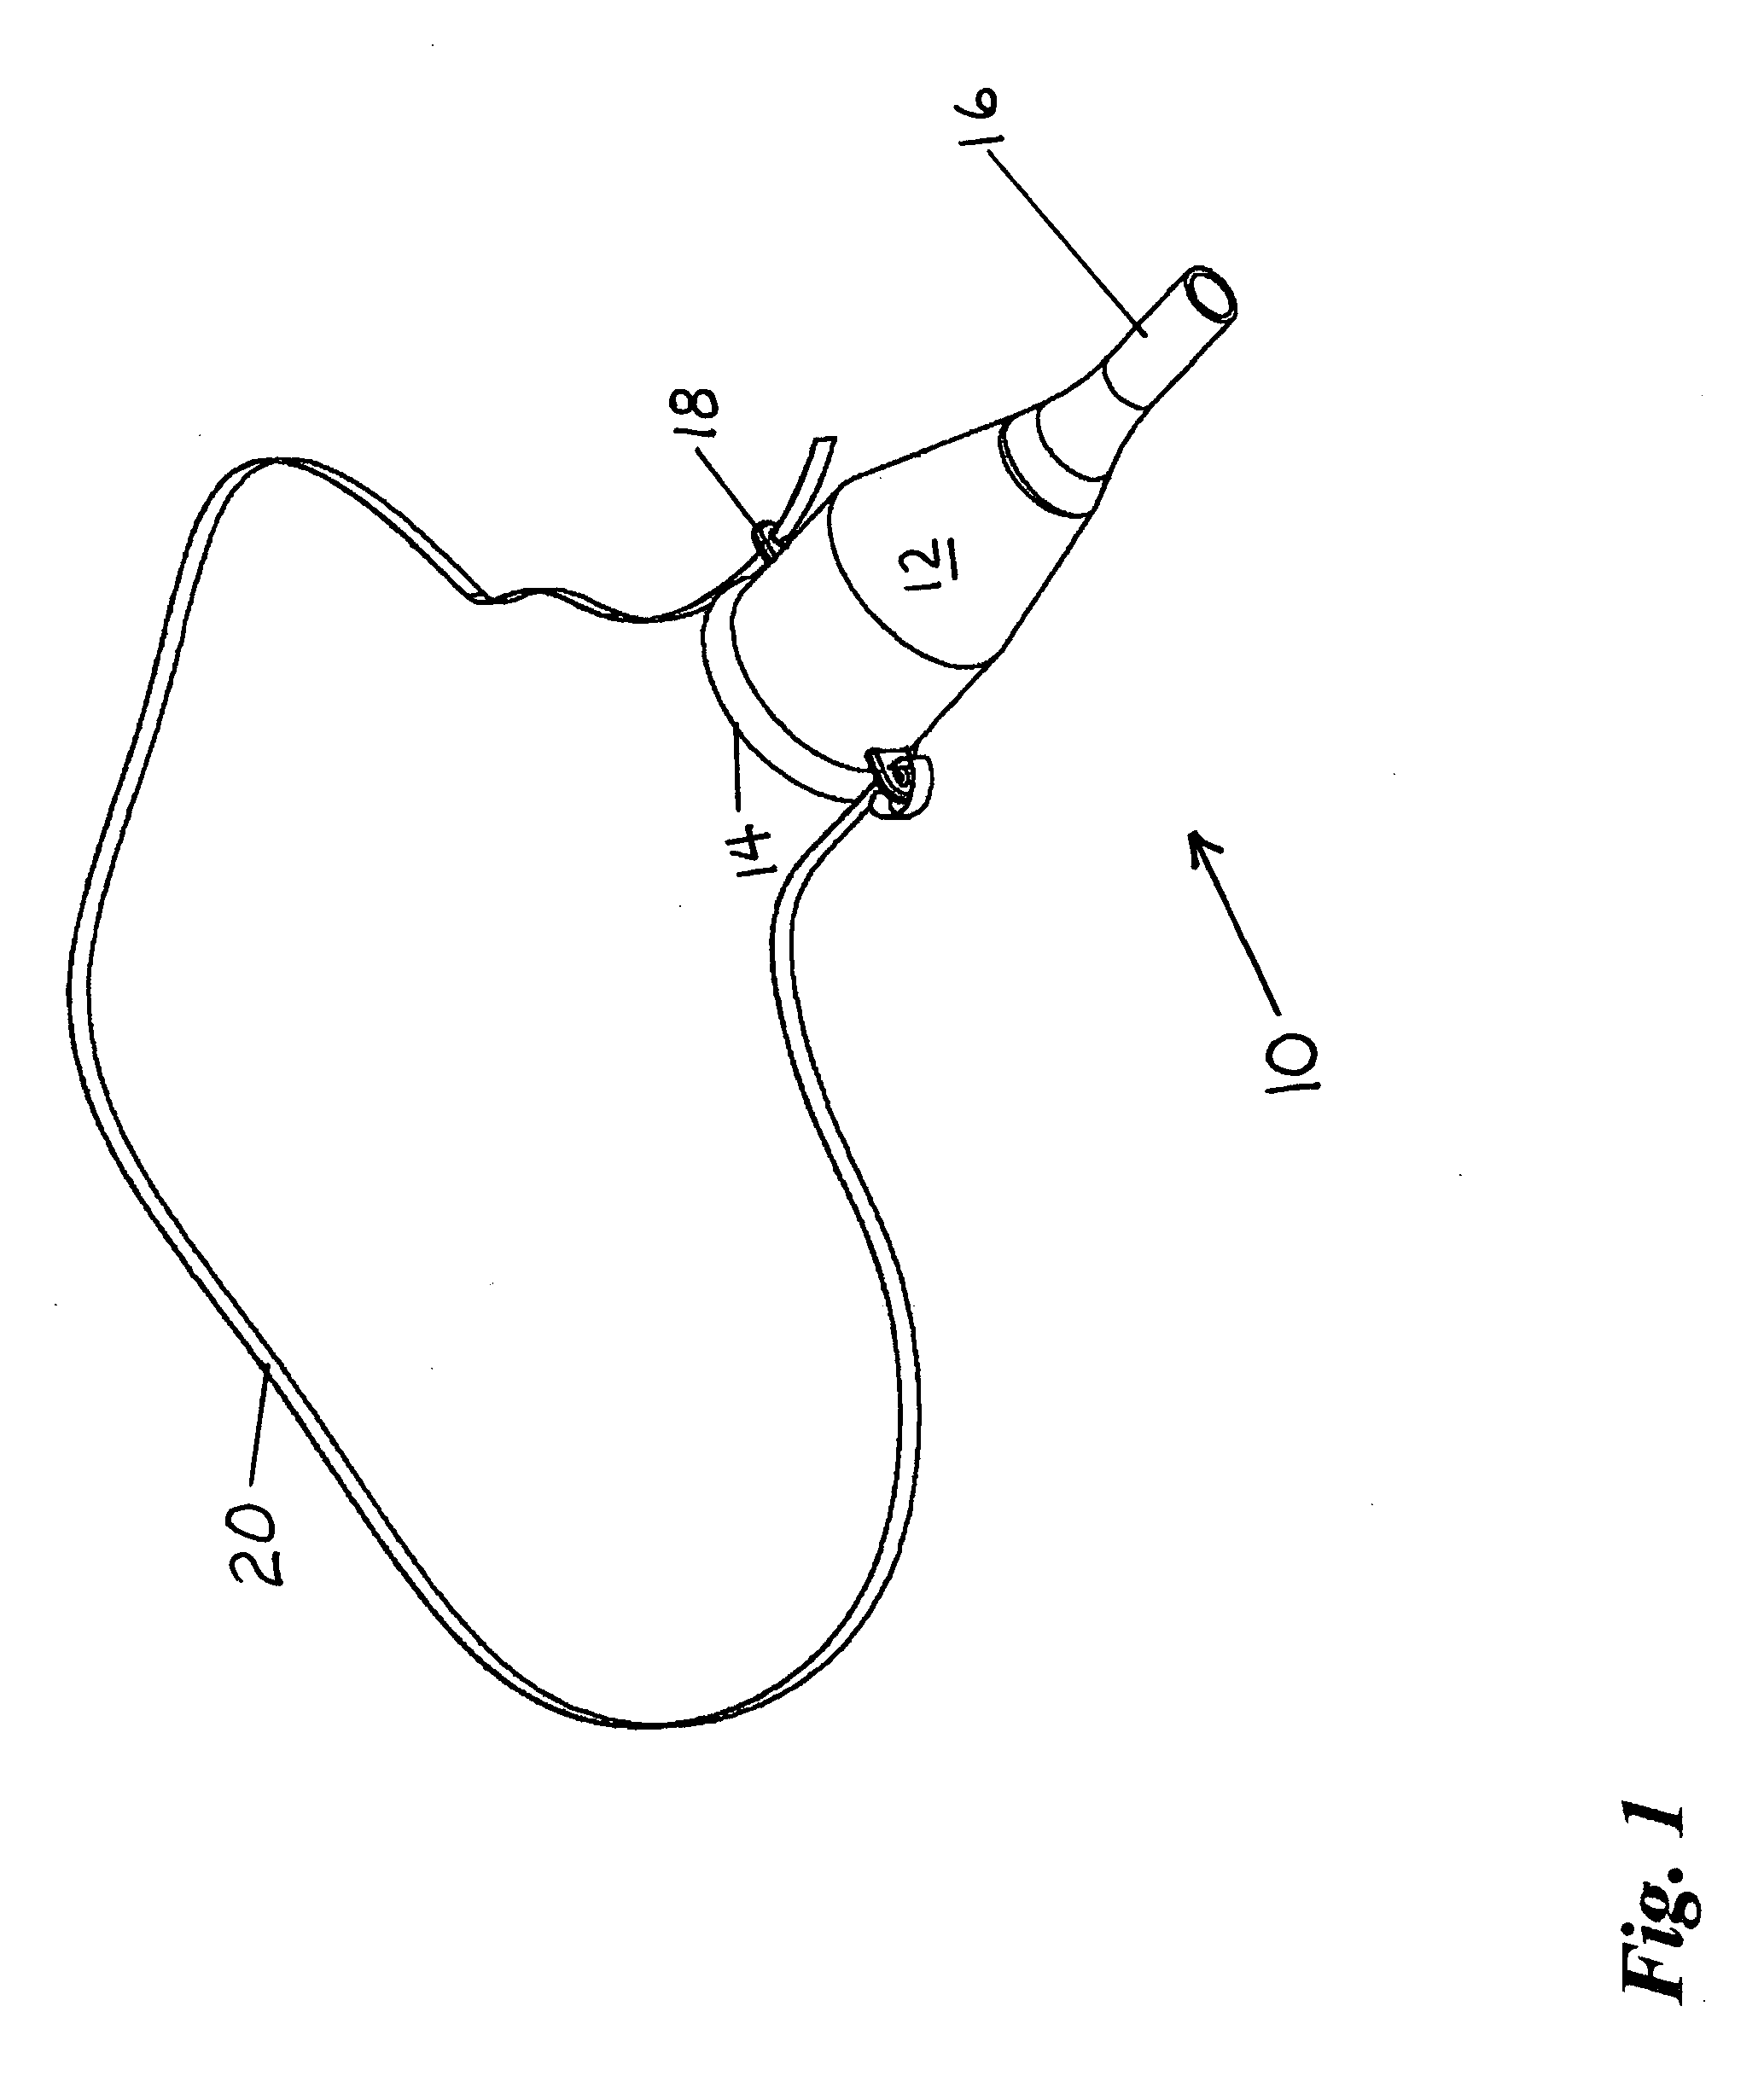 Male urinary incontinence apparatus